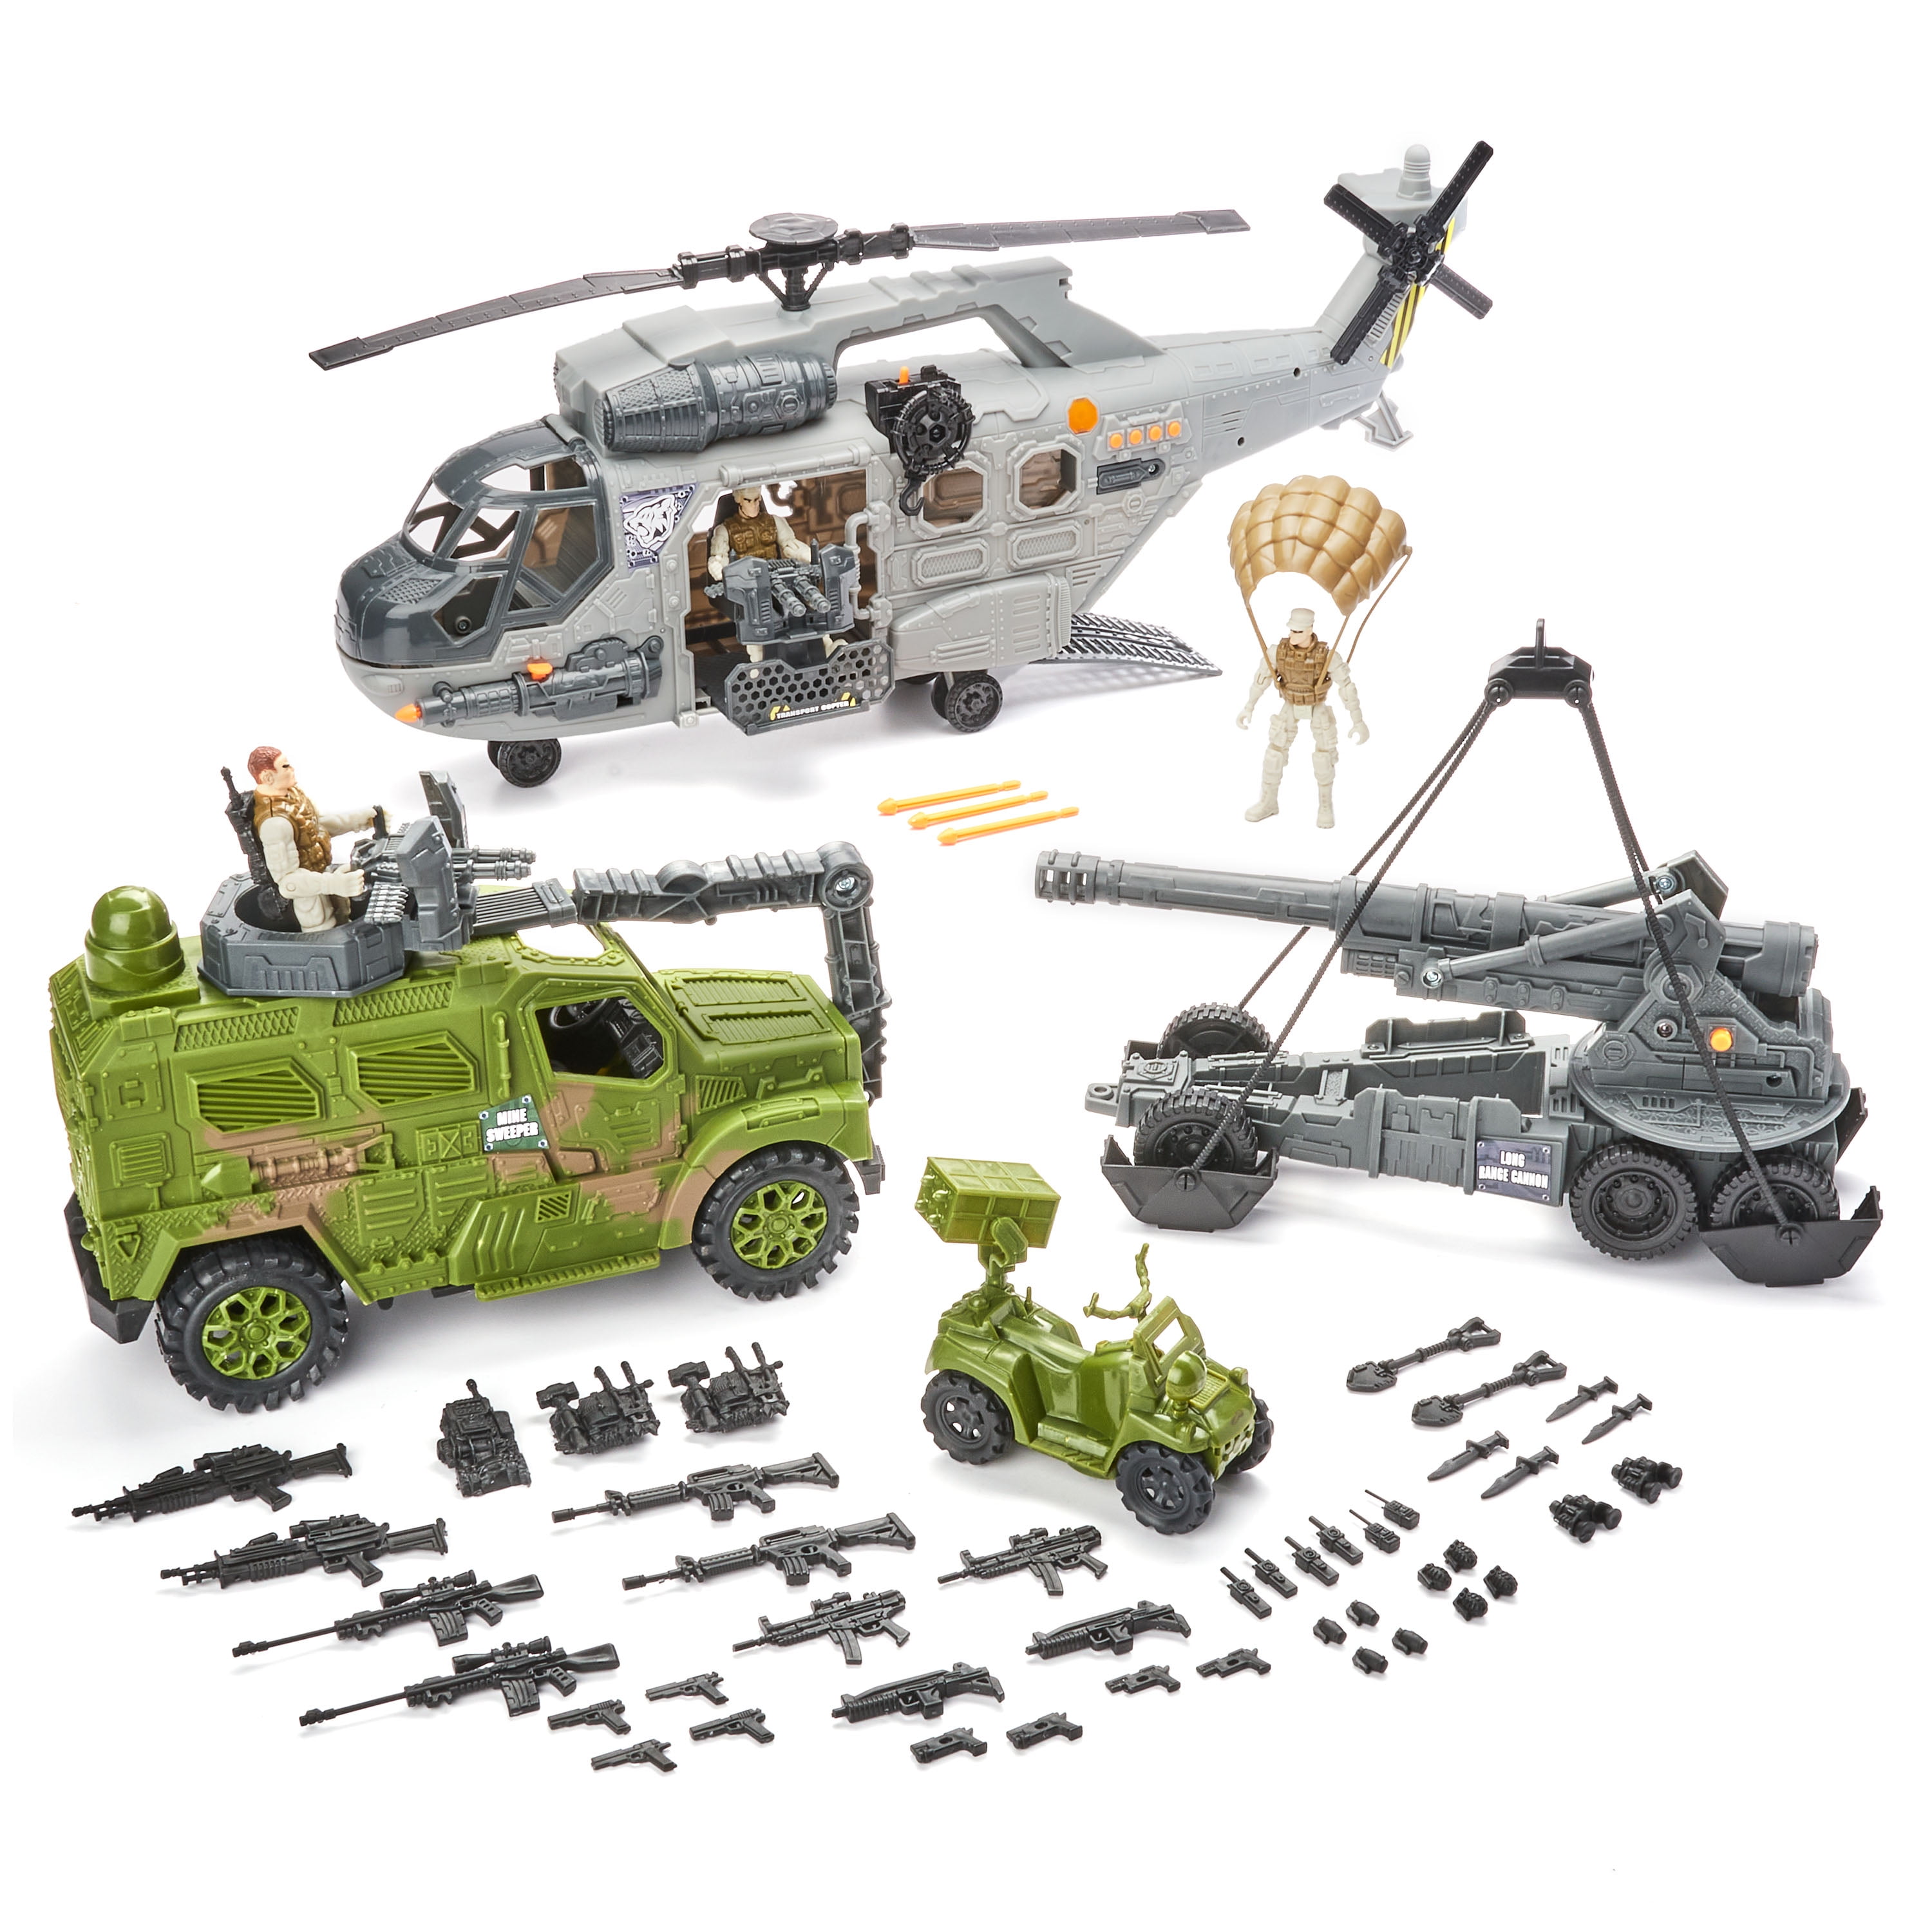 150 pcs Military Playset Box Plastic Toy Soldiers Army Men Figures & Accessories 